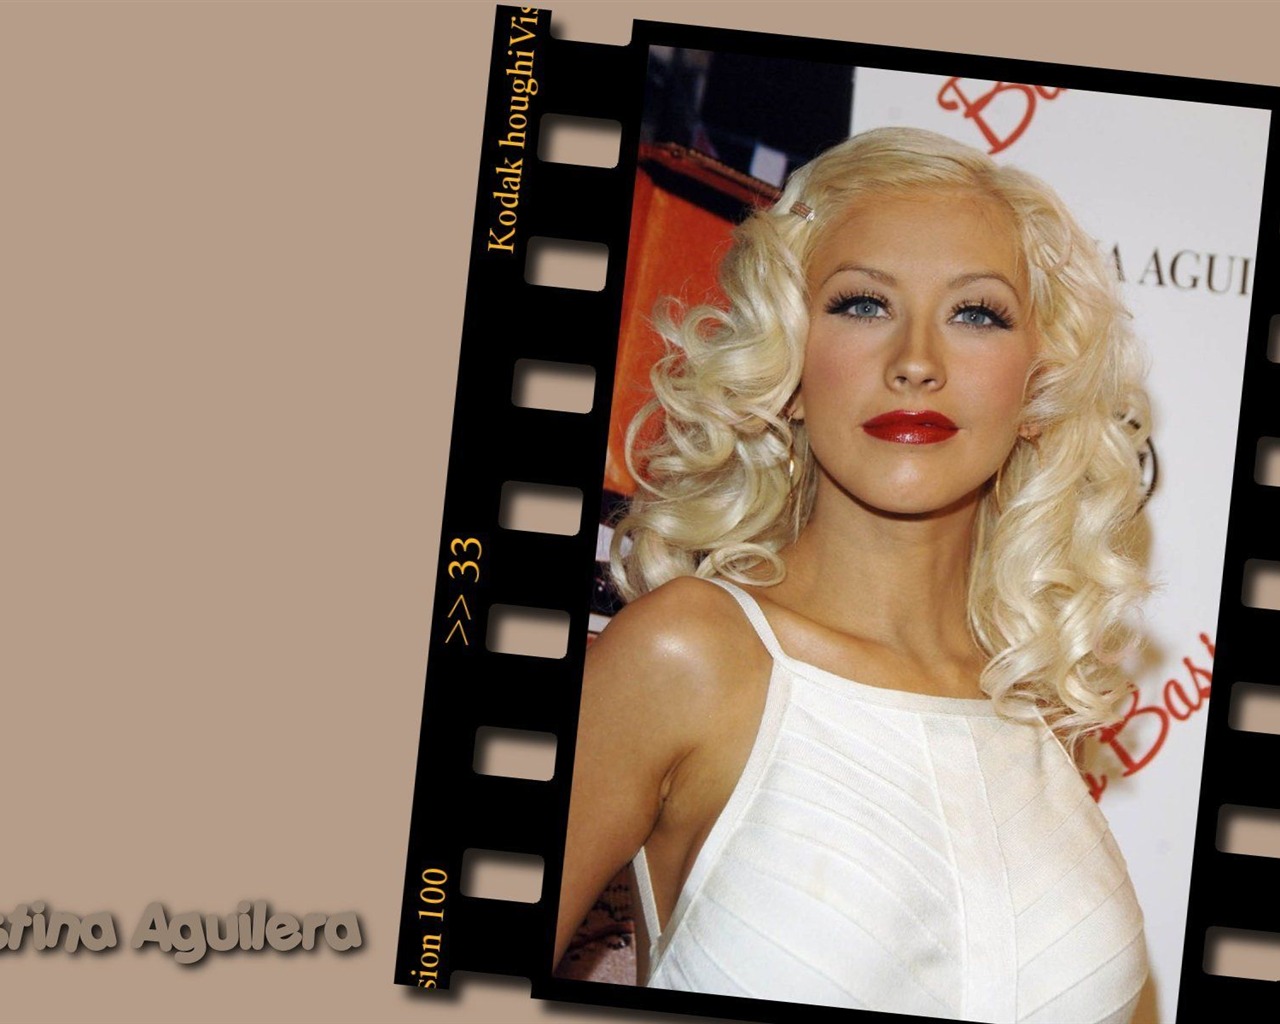 Christina Aguilera #008 - 1280x1024 Wallpapers Pictures Photos Images